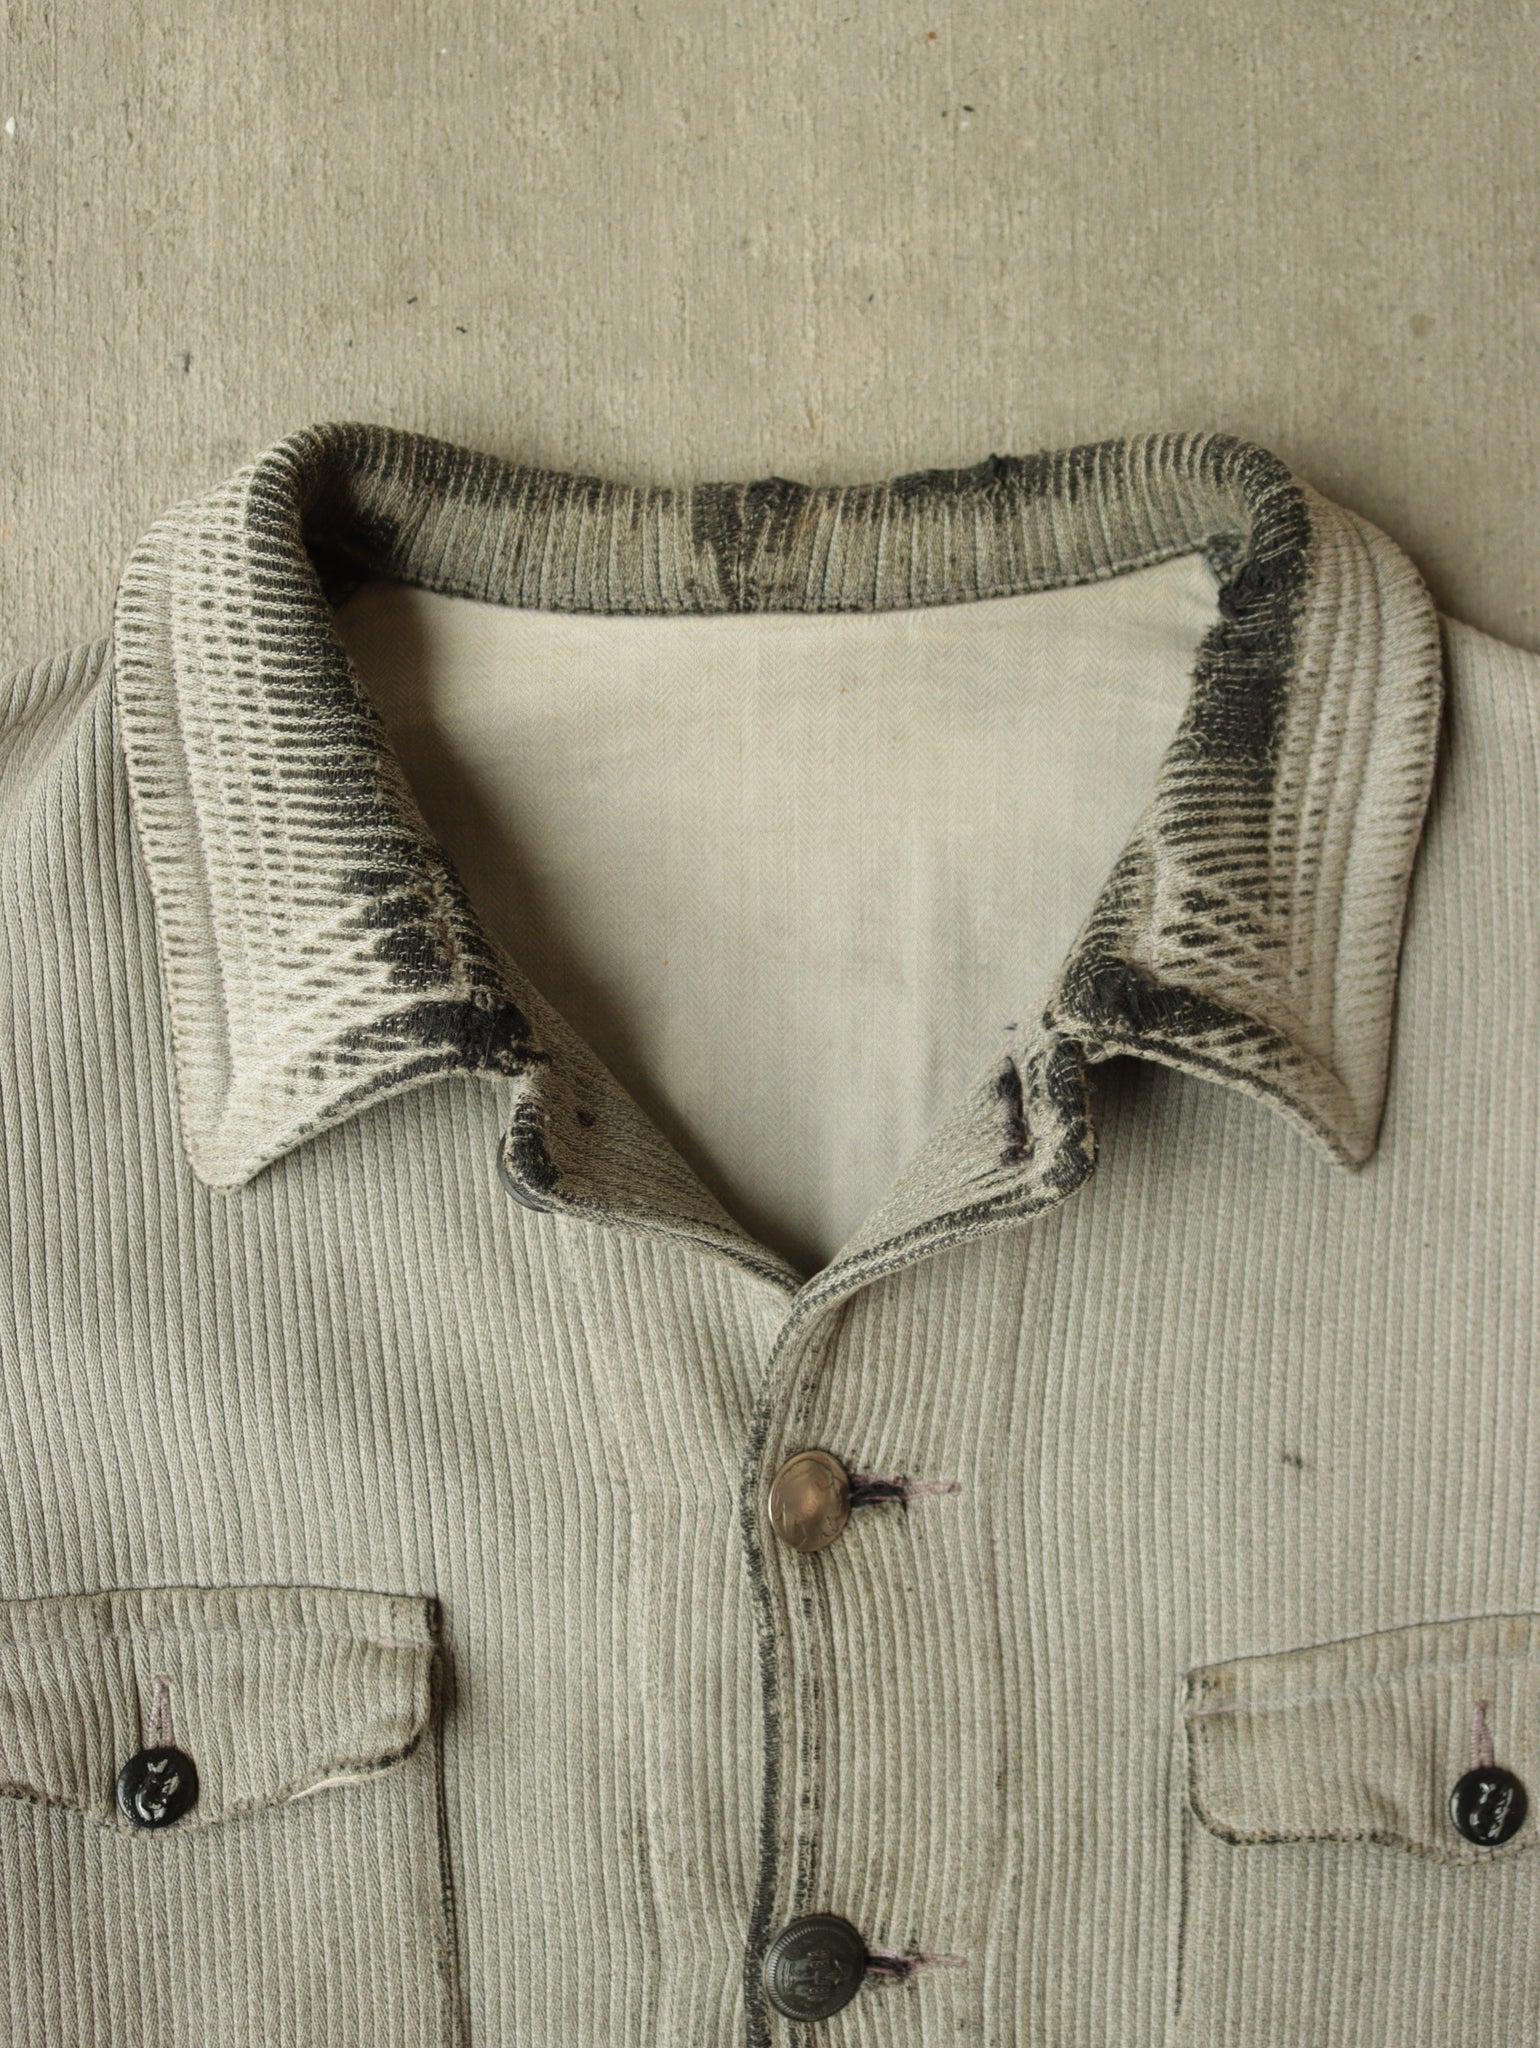 1940S FRENCH PIQUE CORDUROY HUNTING JACKET - L